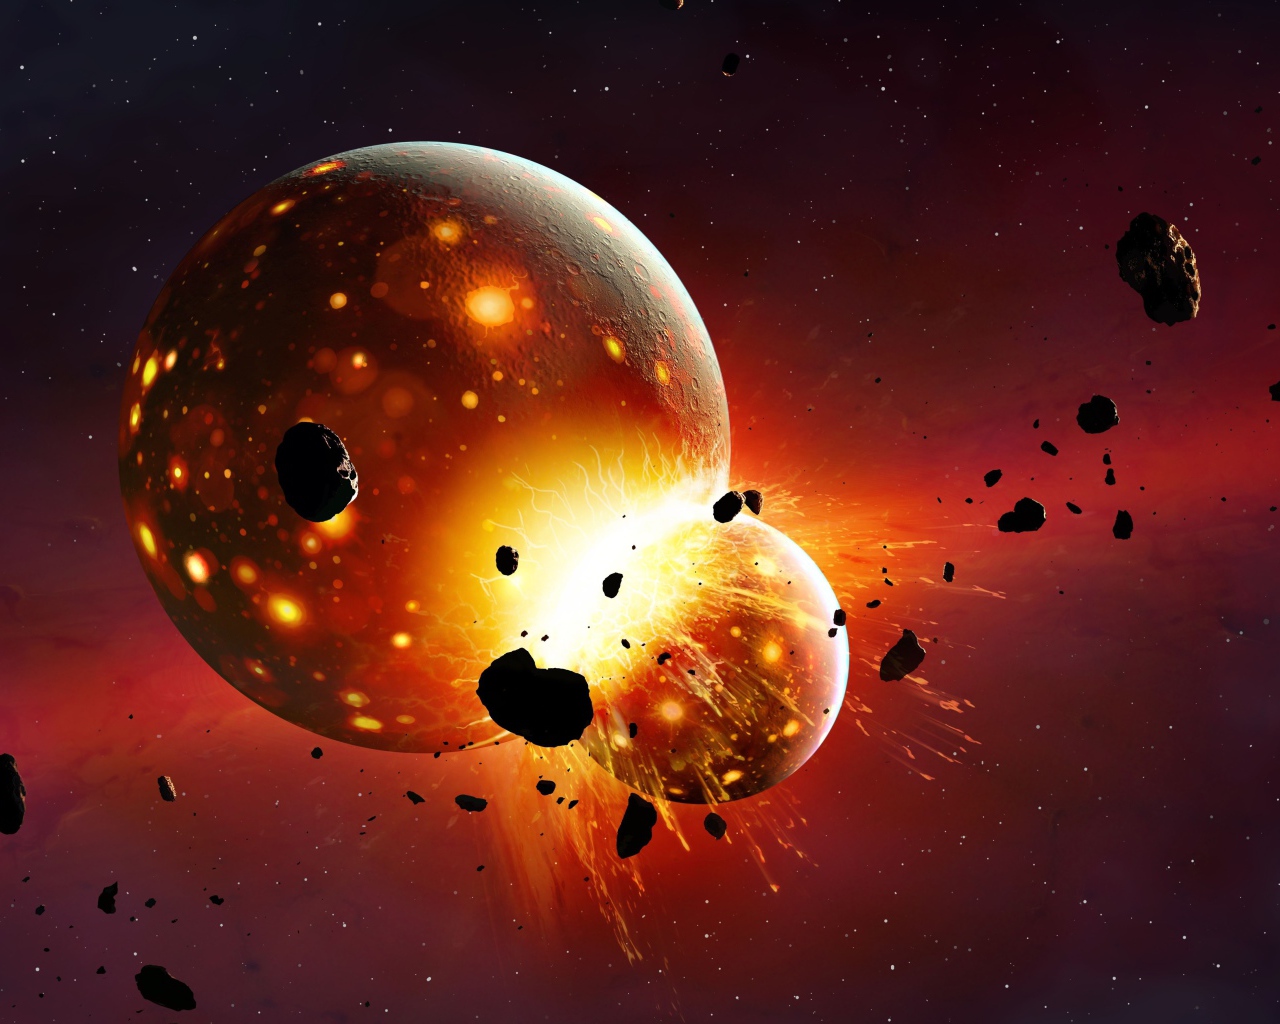 Explosion from a collision of planets in space